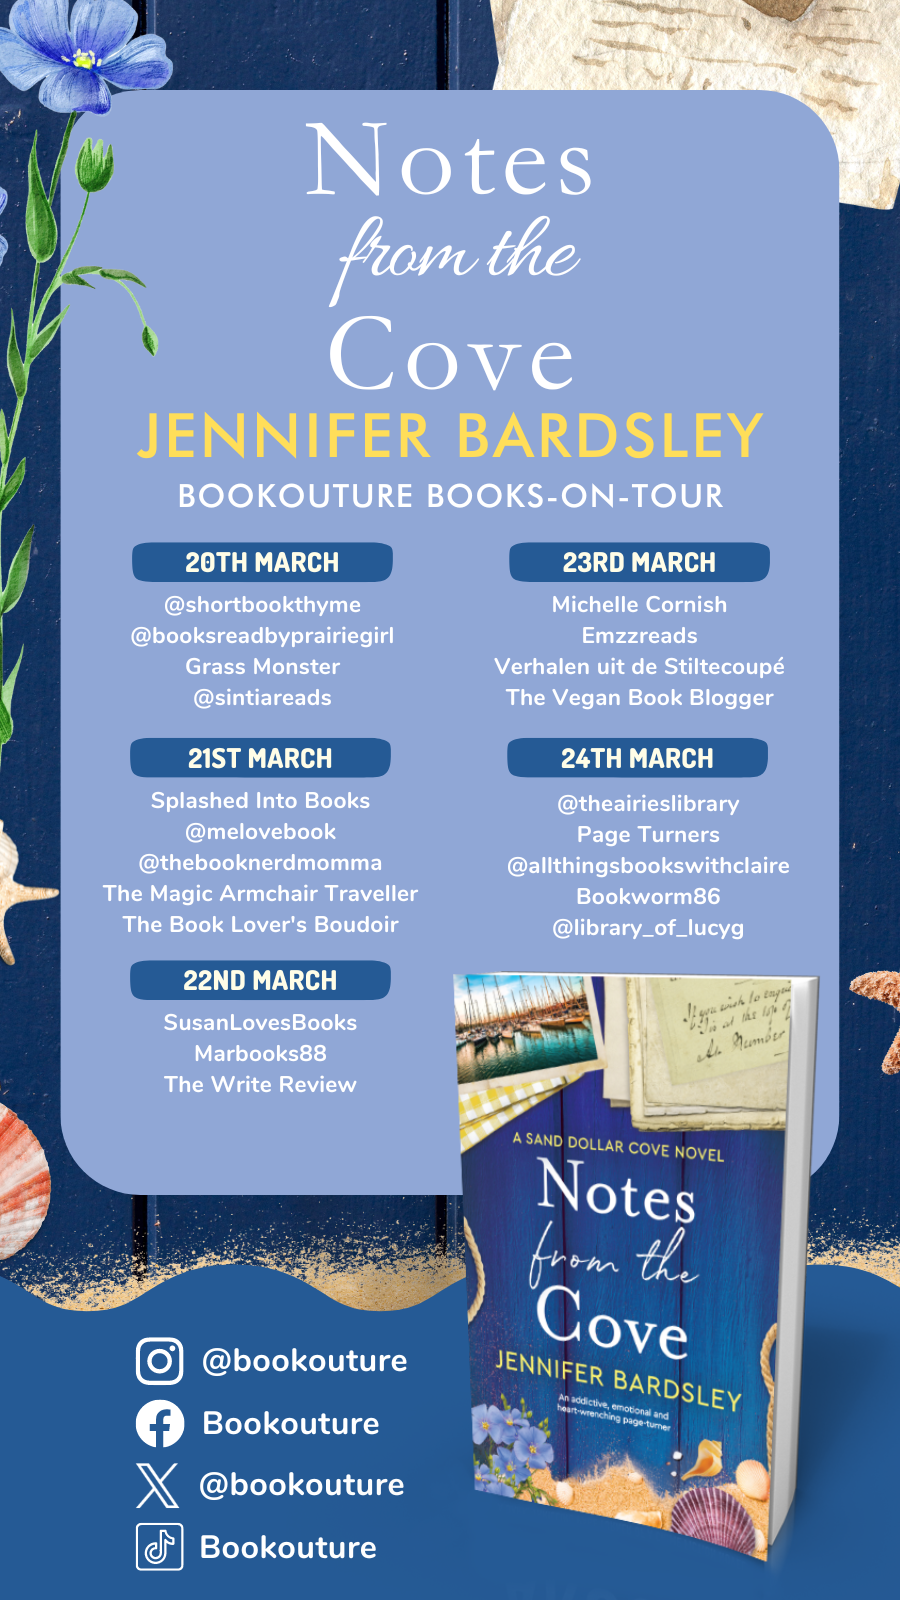 Blog Tour for Notes from the Cove by Jennifer Bardsley